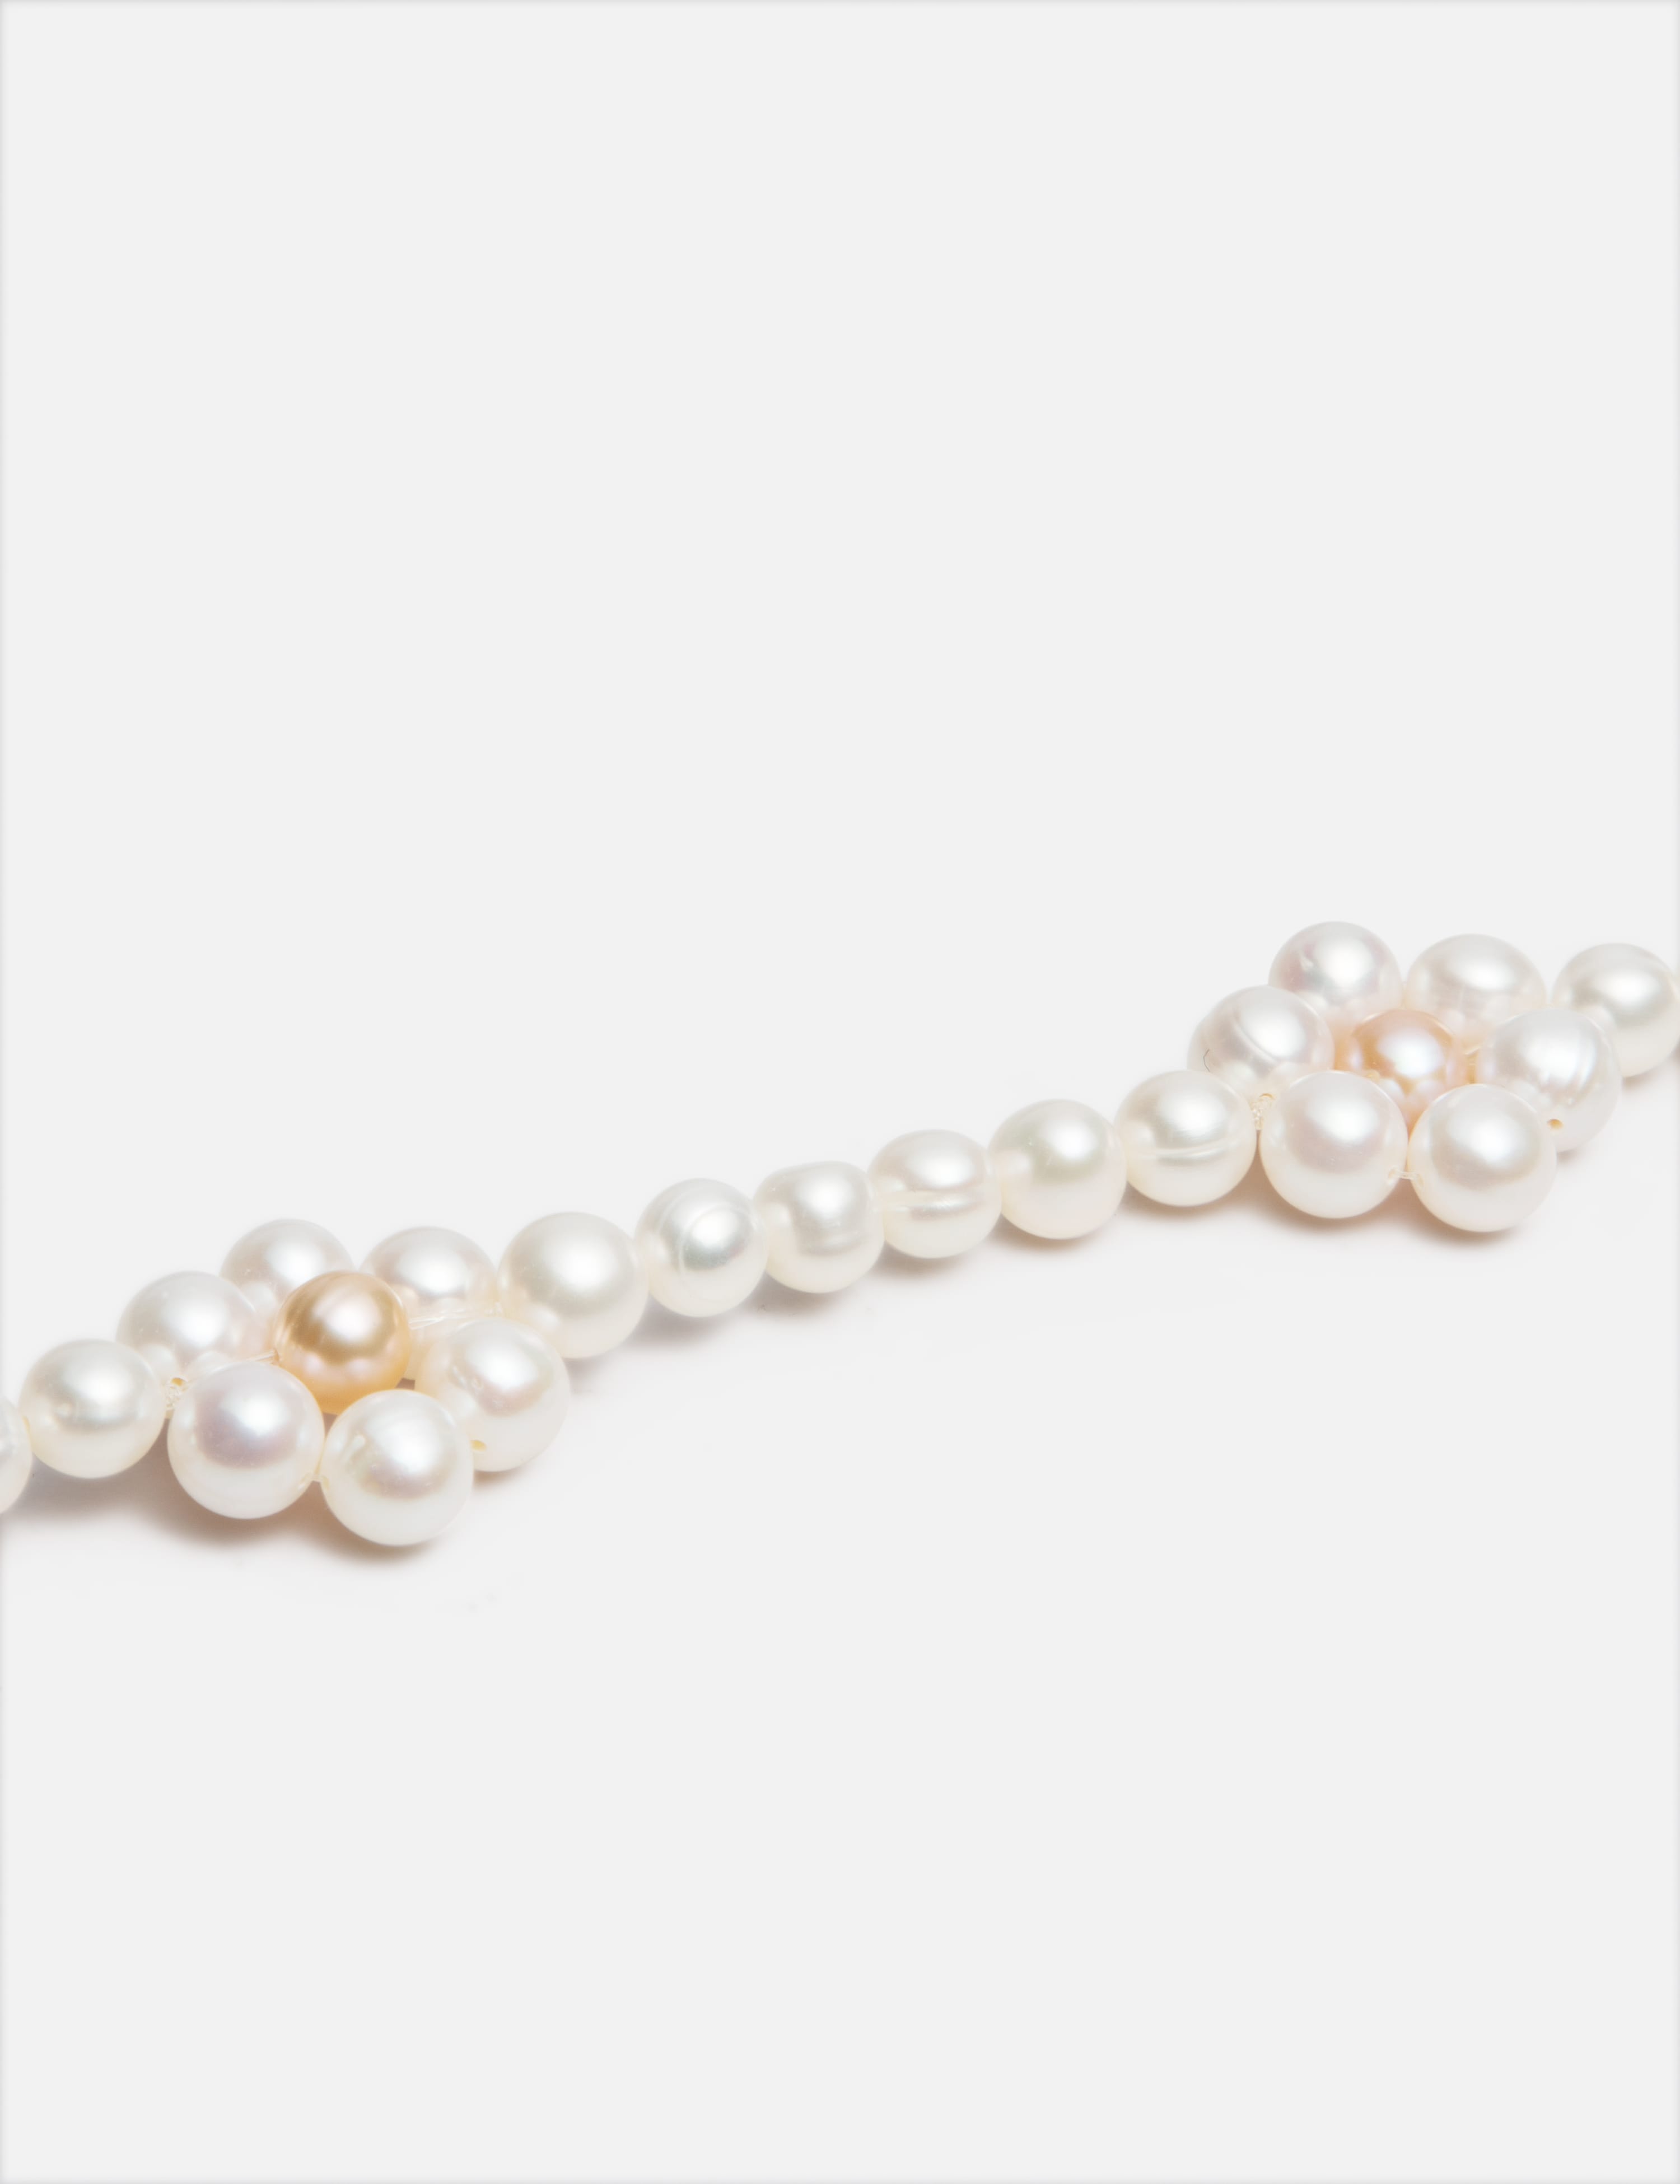 August Woods Gold Daisy Pearl Beaded Necklace Argento.com